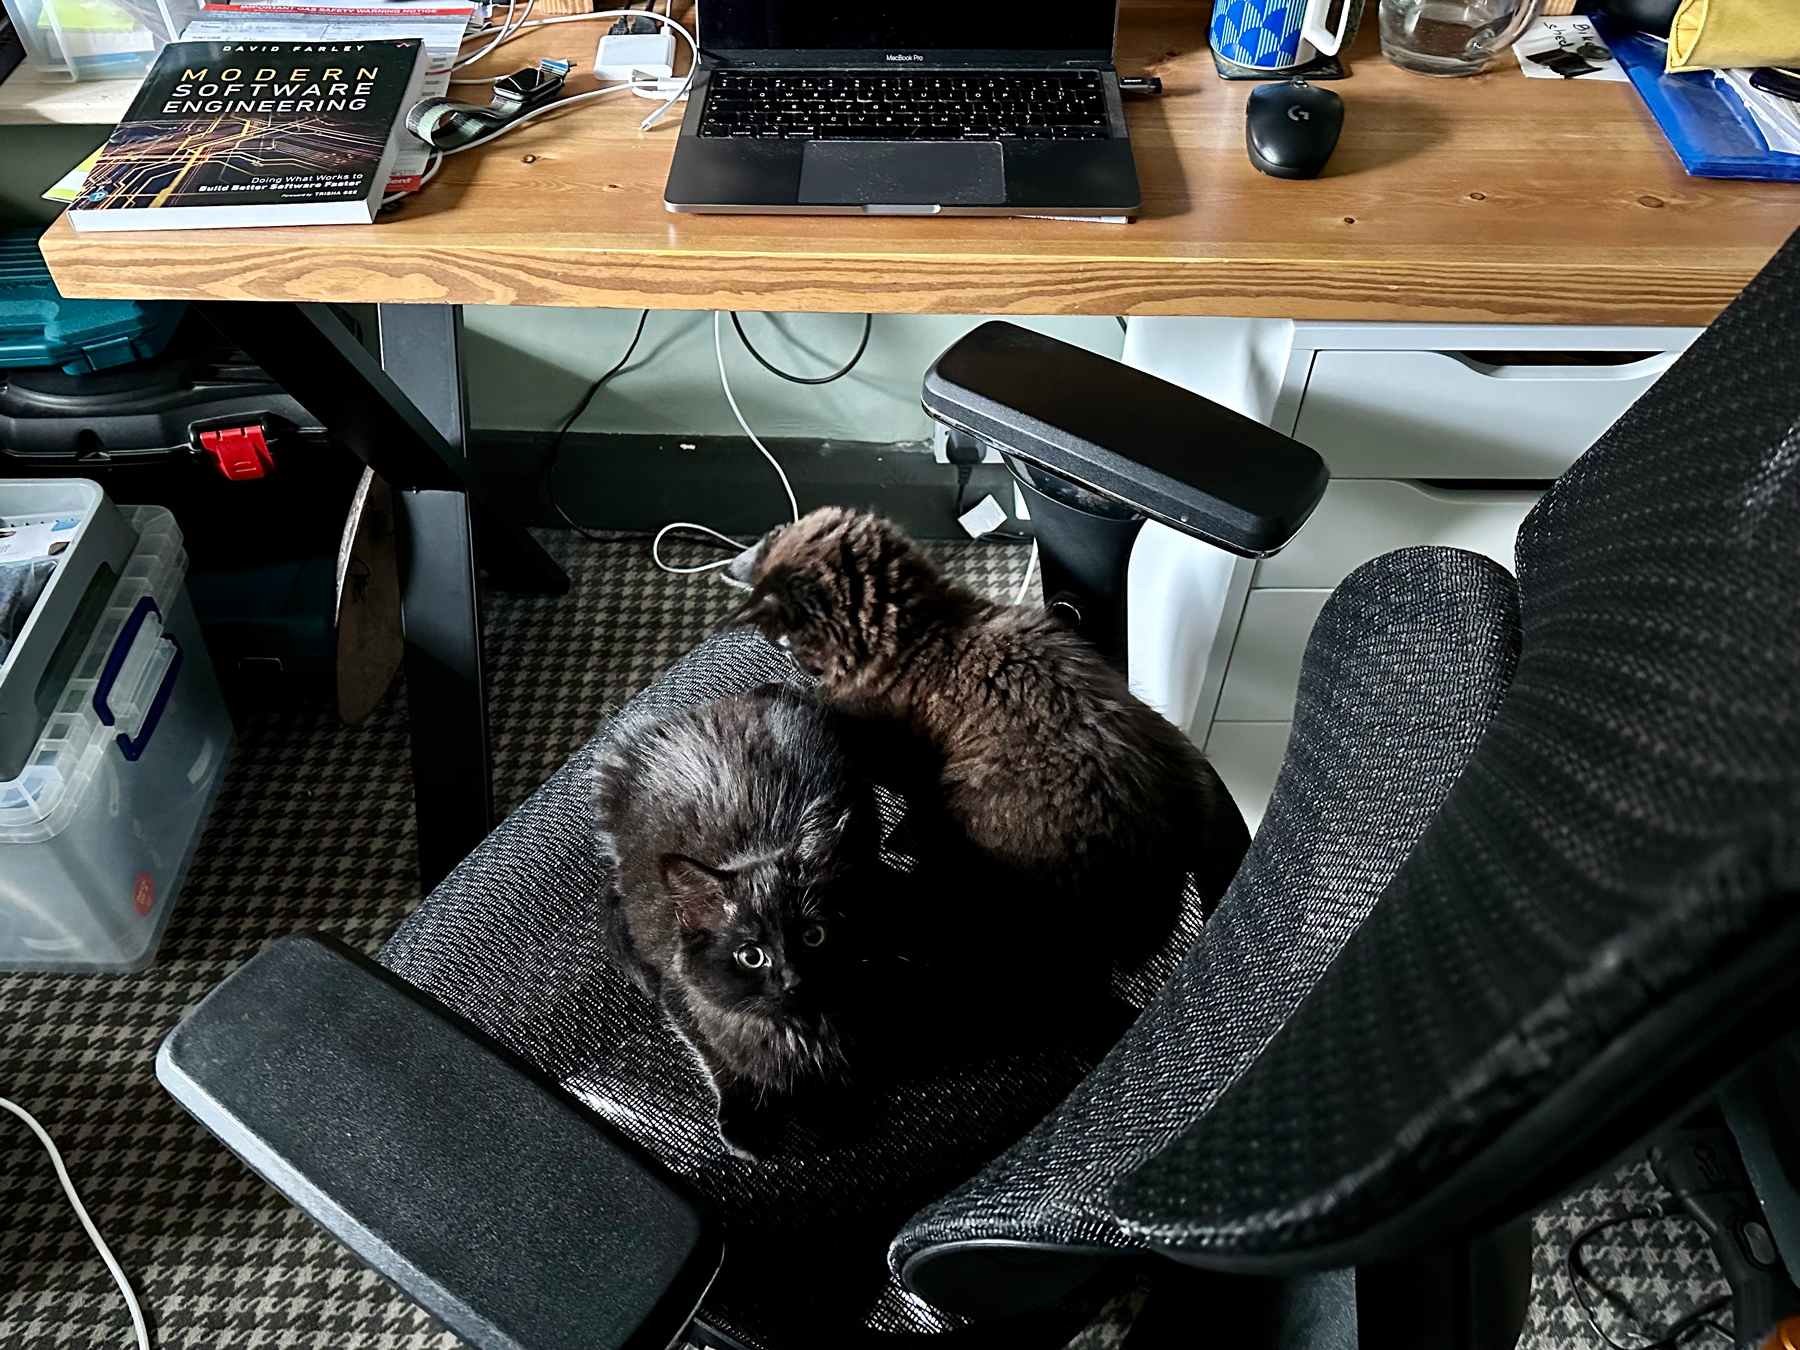 Two black and brown kittens sitting on an office chair looking like they're supposed to be there